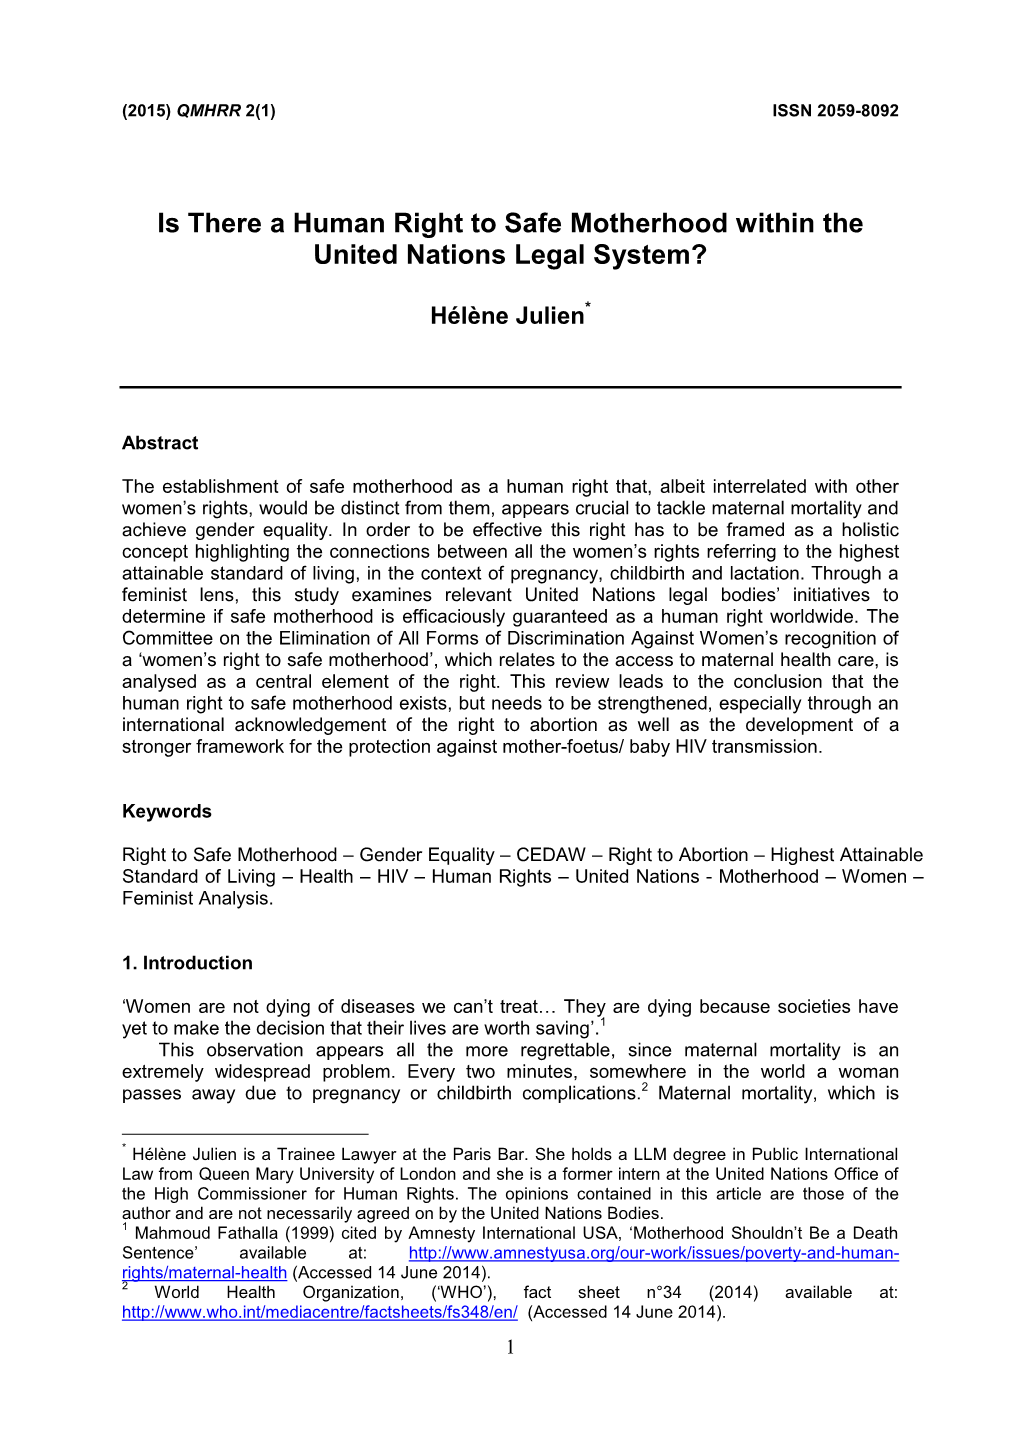 Is There a Human Right to Safe Motherhood Within the United Nations Legal System?